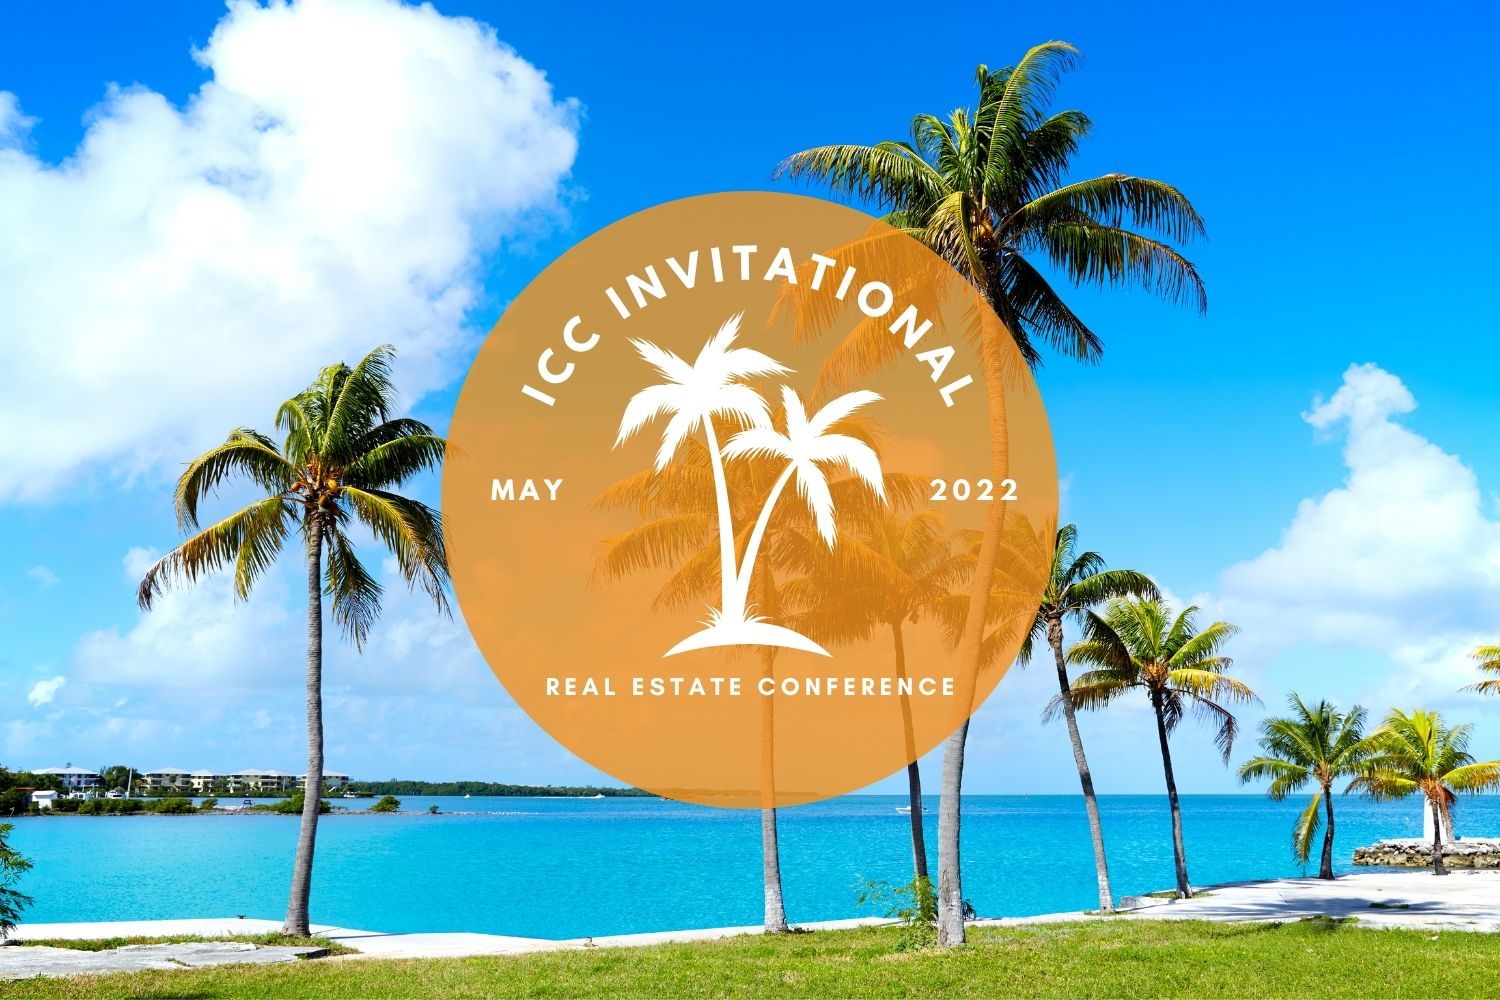 Best Real Estate Conference of 2022 – The ICC Invitational